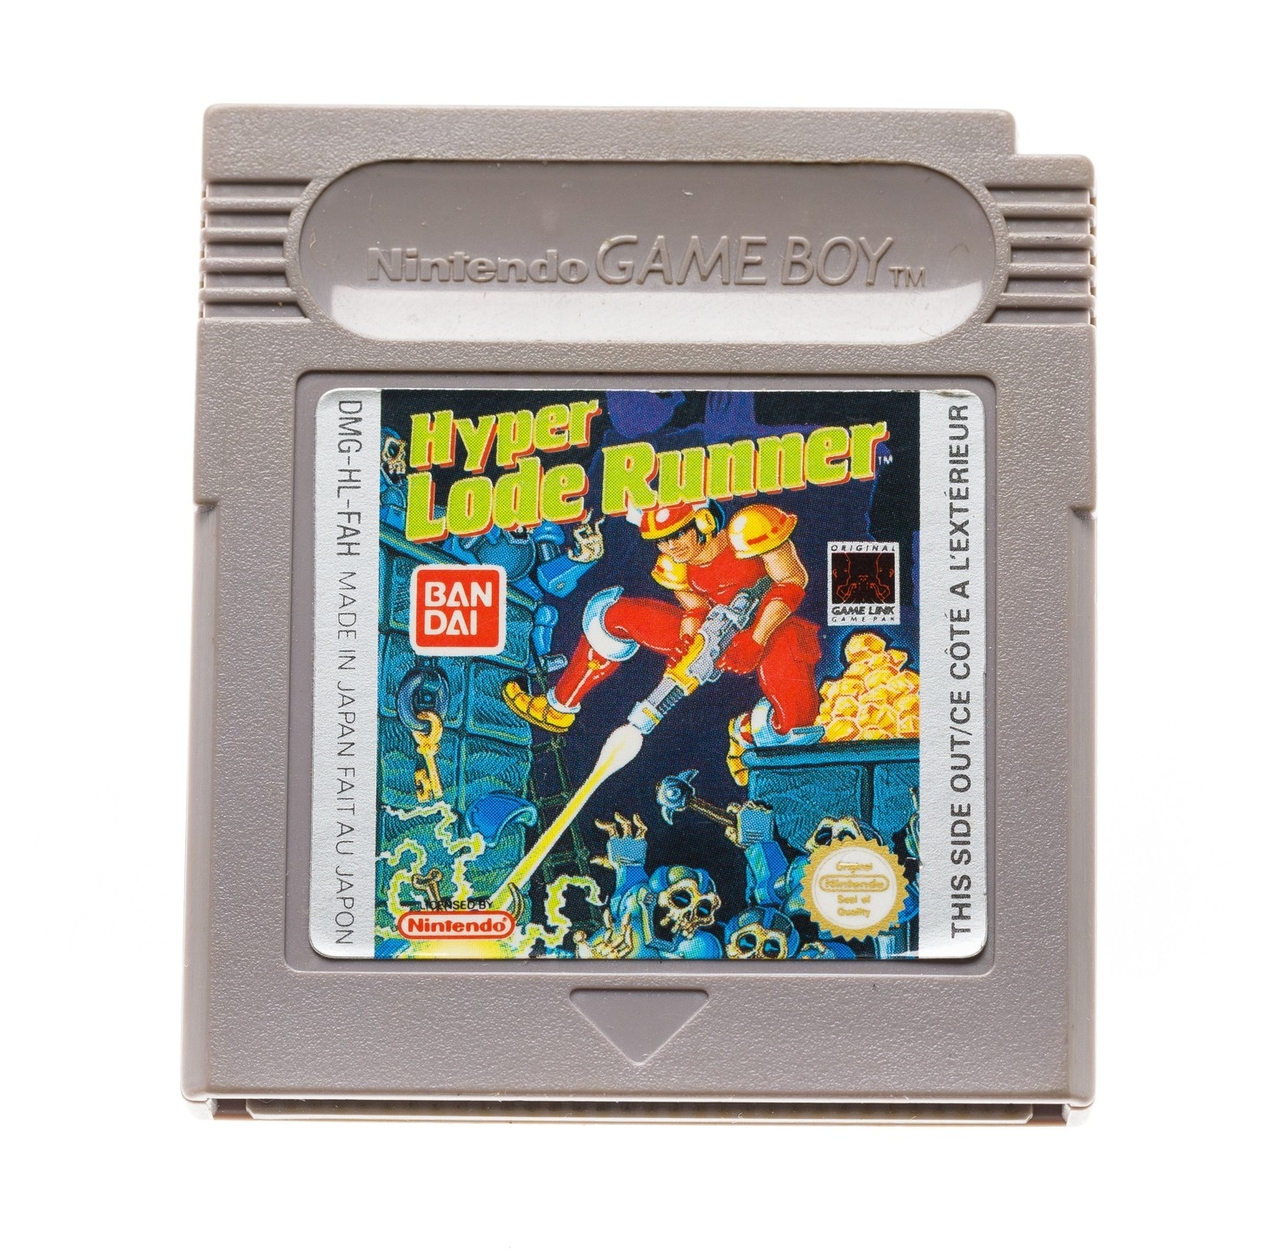 Hyper Lode Runner: The Labyrinth of Doom - Gameboy Classic Games